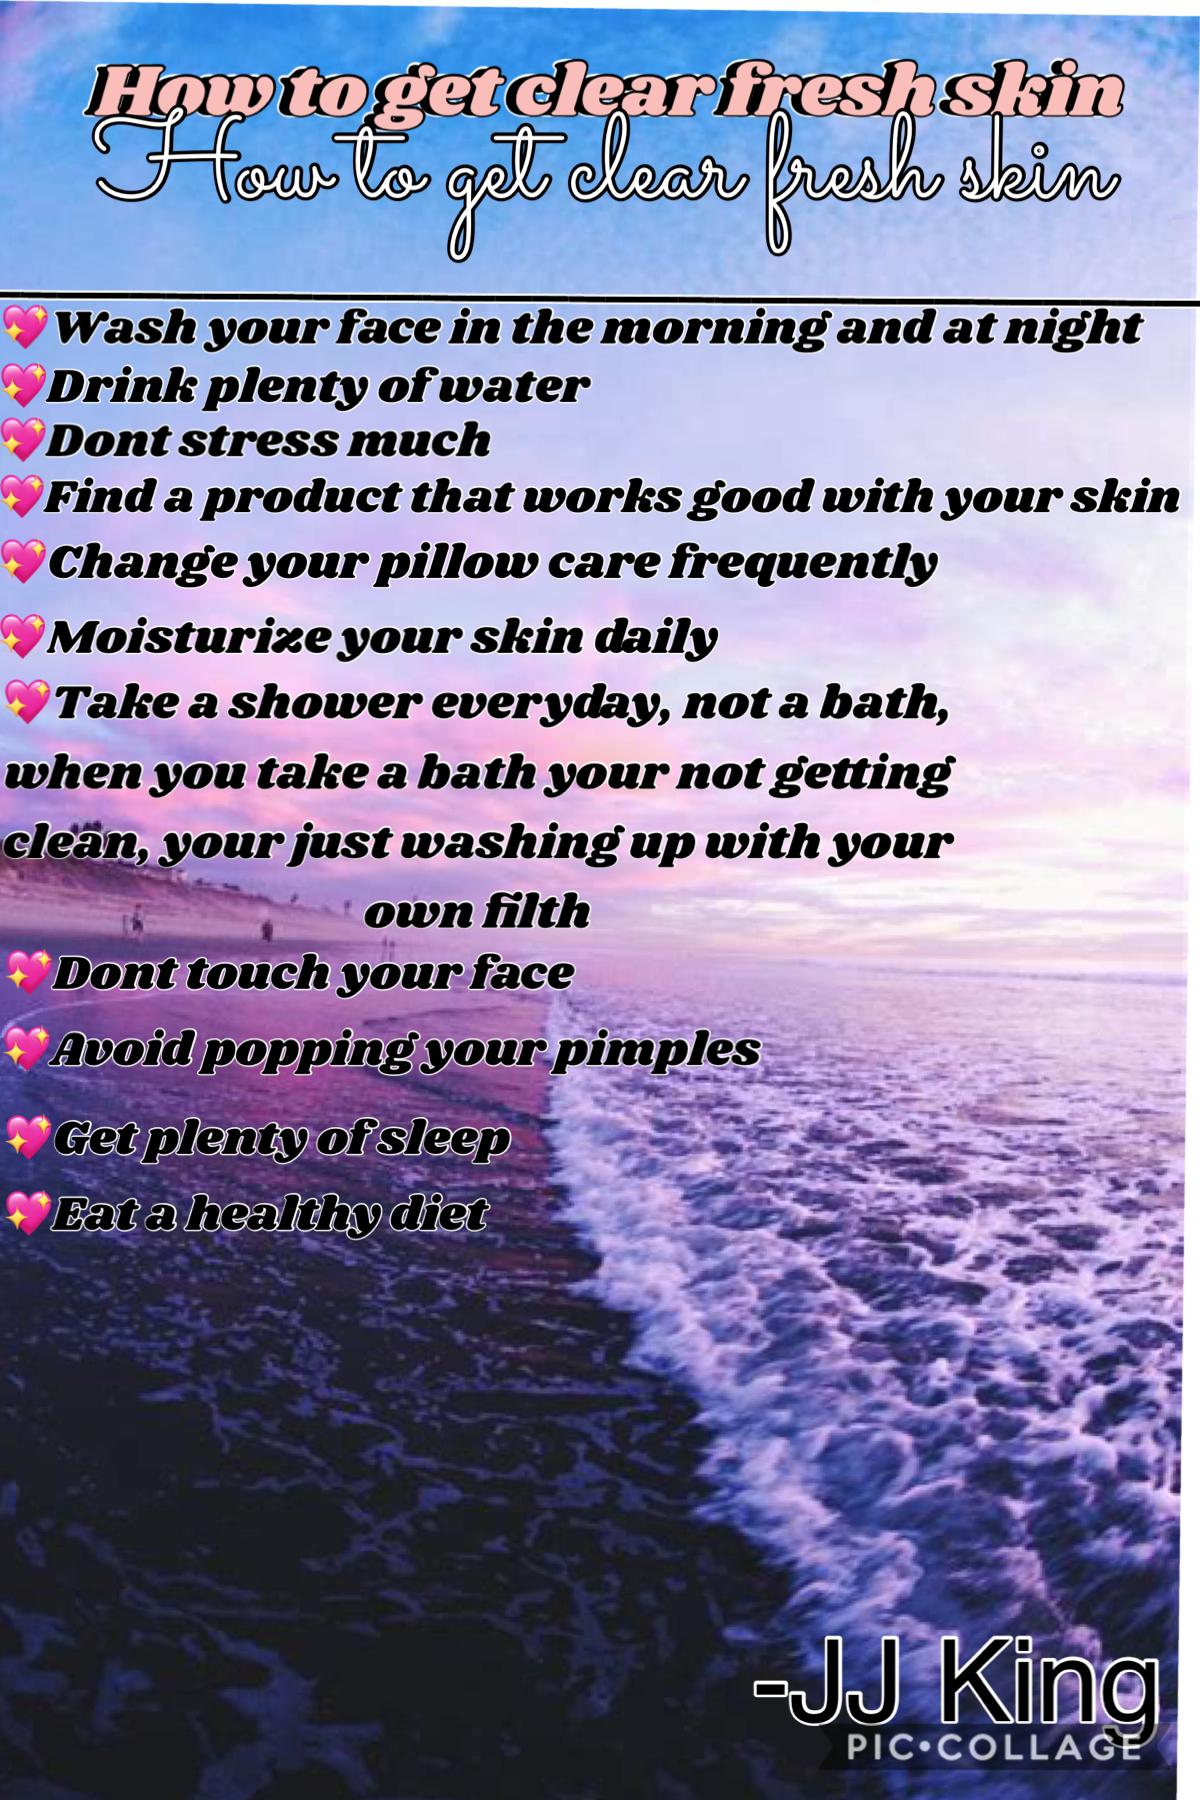 💖How to get clear fresh skin💖